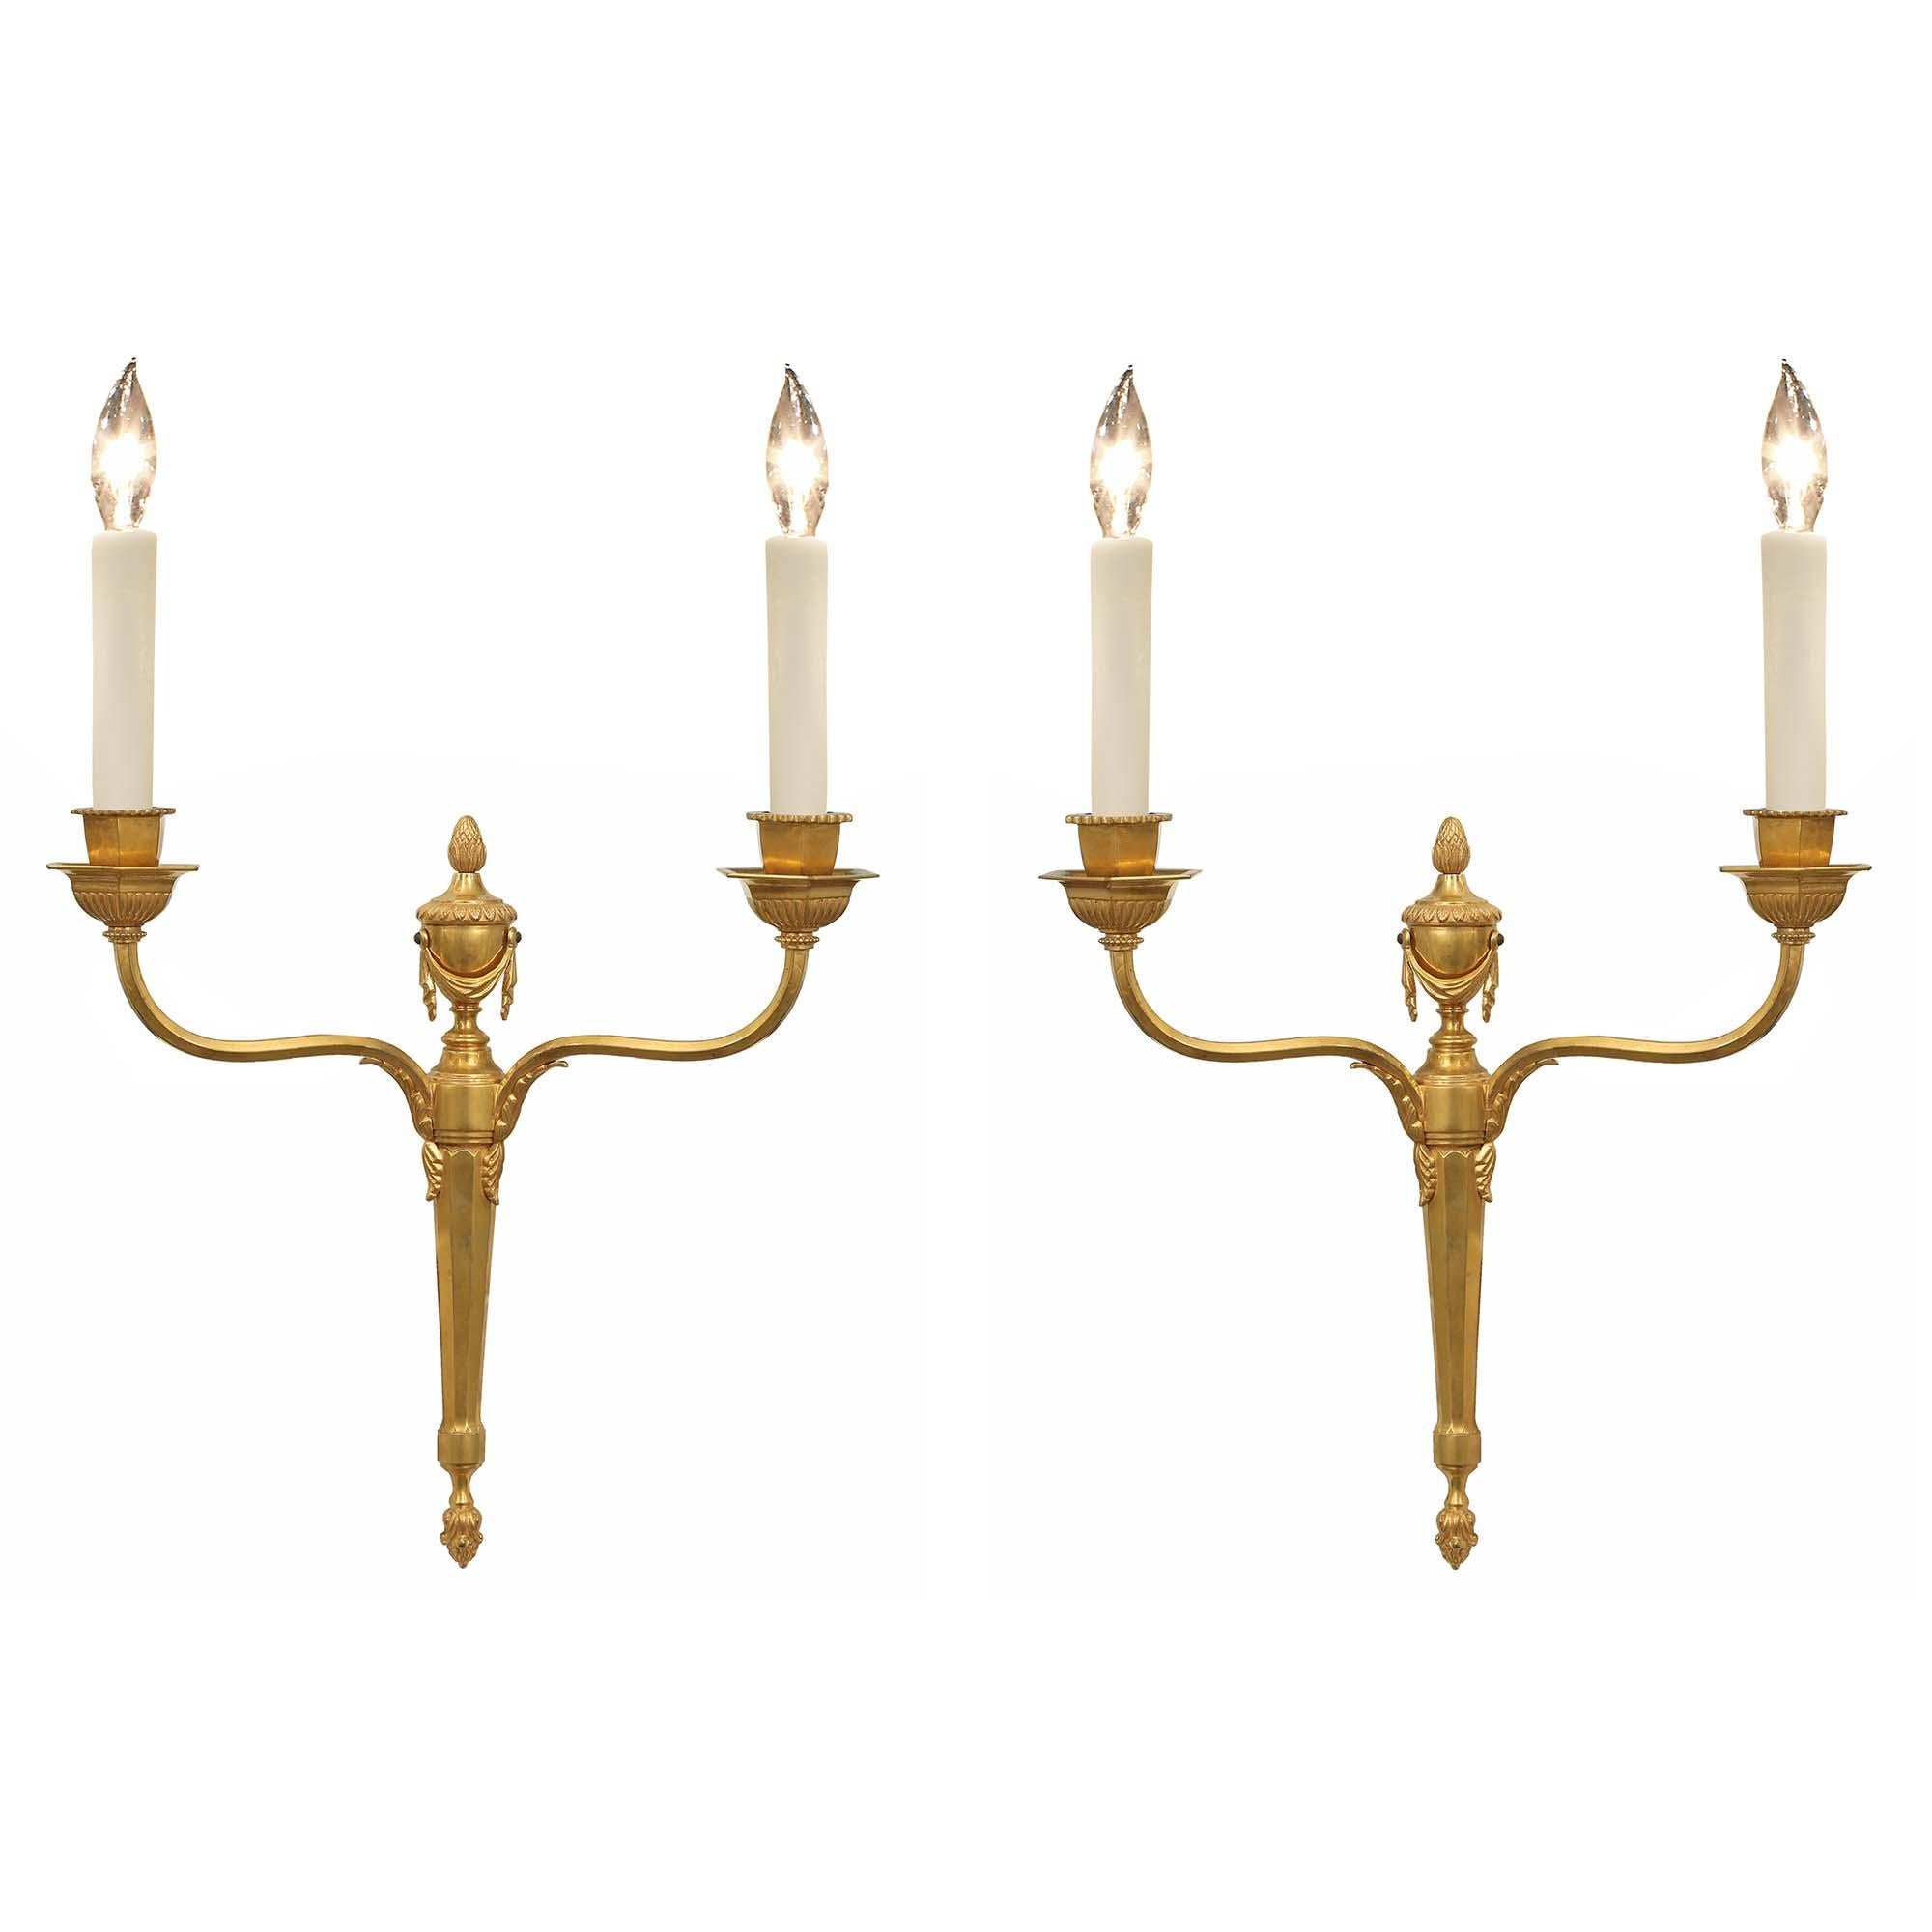 An attractive pair of French 19th century Louis XVI st. two arm ormolu sconces. The top of backplate has an urn with swaging drapes below are the two 'S' scrolled arms which have acanthus leaf mounts. The bottom of the backplate is a tapered fluted